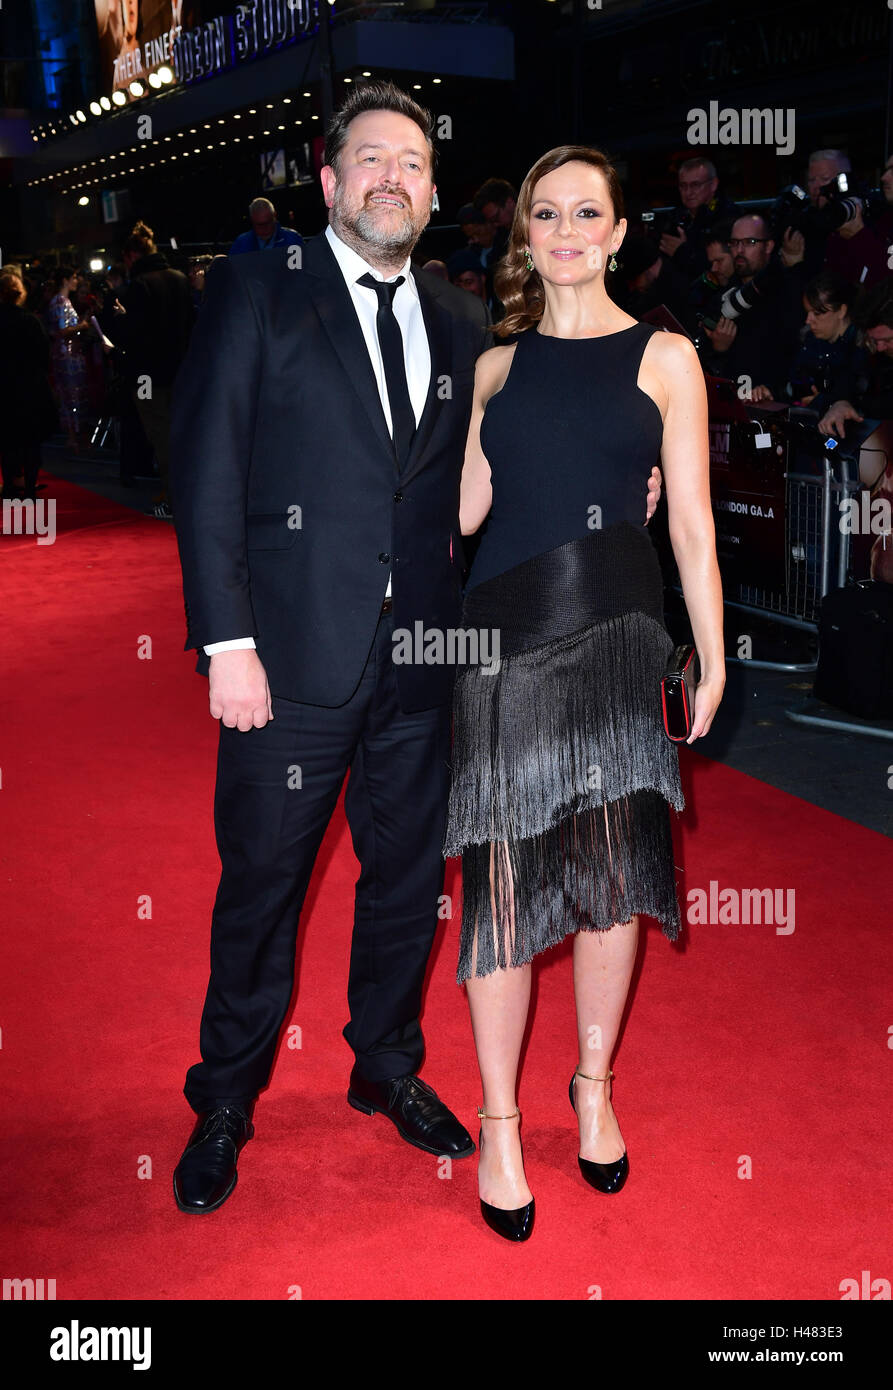 Guy Garvey and Rachael Stirling attending the 60th BFI London Film Festival screening of Their Finest held at Odeon Cinema in Leicester Square, London. PRESS ASSOCIATION Photo. Picture date: Thursday October 13, 2016. See PA Story SHOWBIZ Finest. Photo credit should read: Ian West/PA Wire Stock Photo